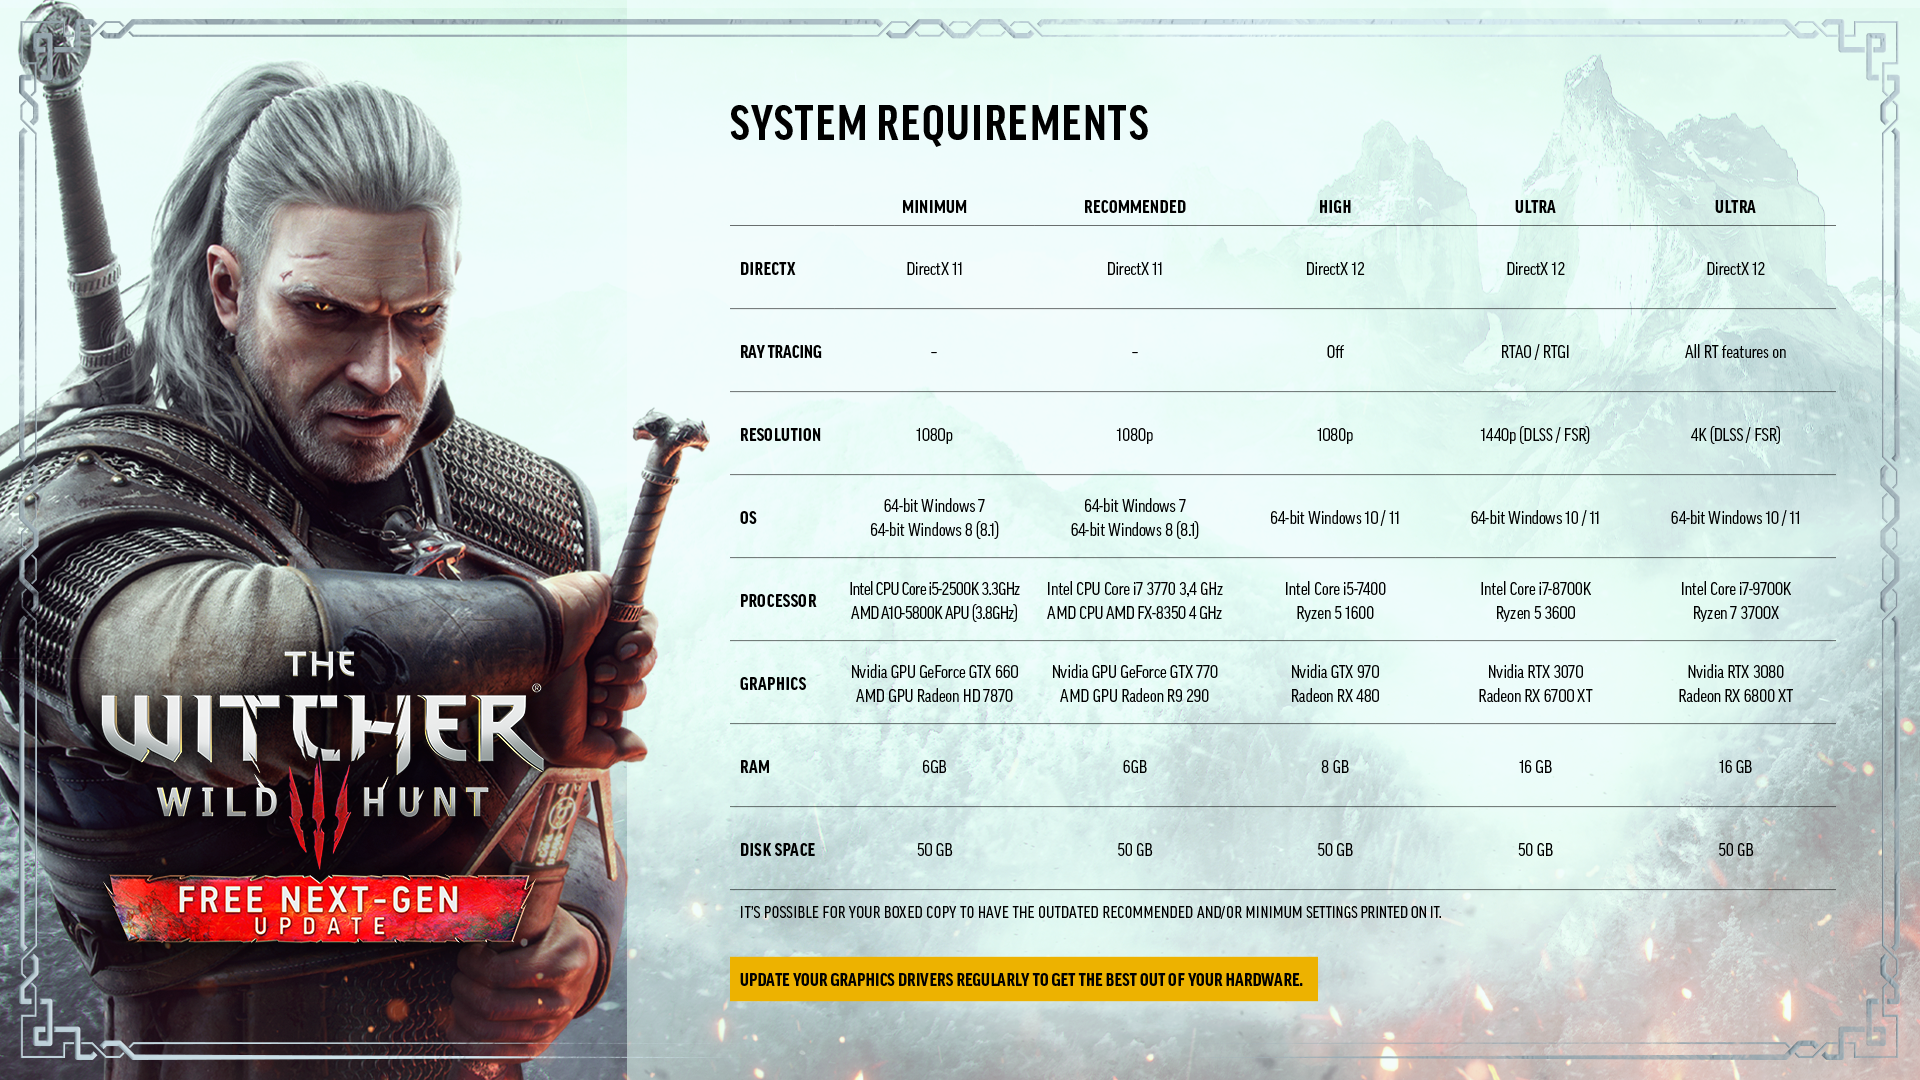 The Witcher 3: Wild Hunt System Requirements — The Witcher 3: Wild